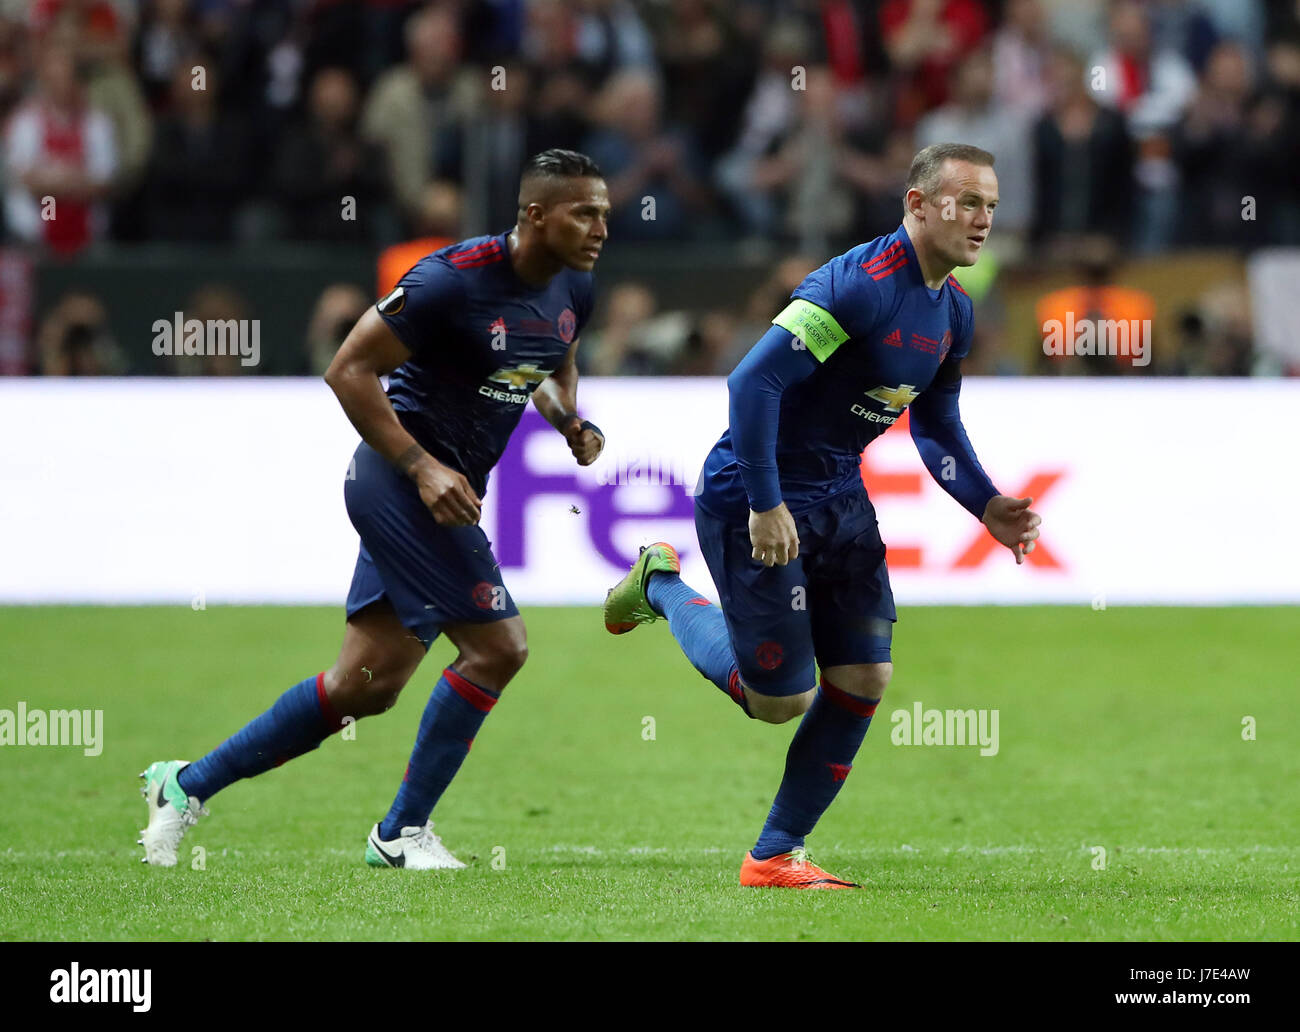 Manchester United's Luis Antonio Valencia (left) gives the captain's armband to Wayne Rooney as he is substituted on during the UEFA Europa League Final at the Friends Arena in Stockholm, Sweden. Stock Photo